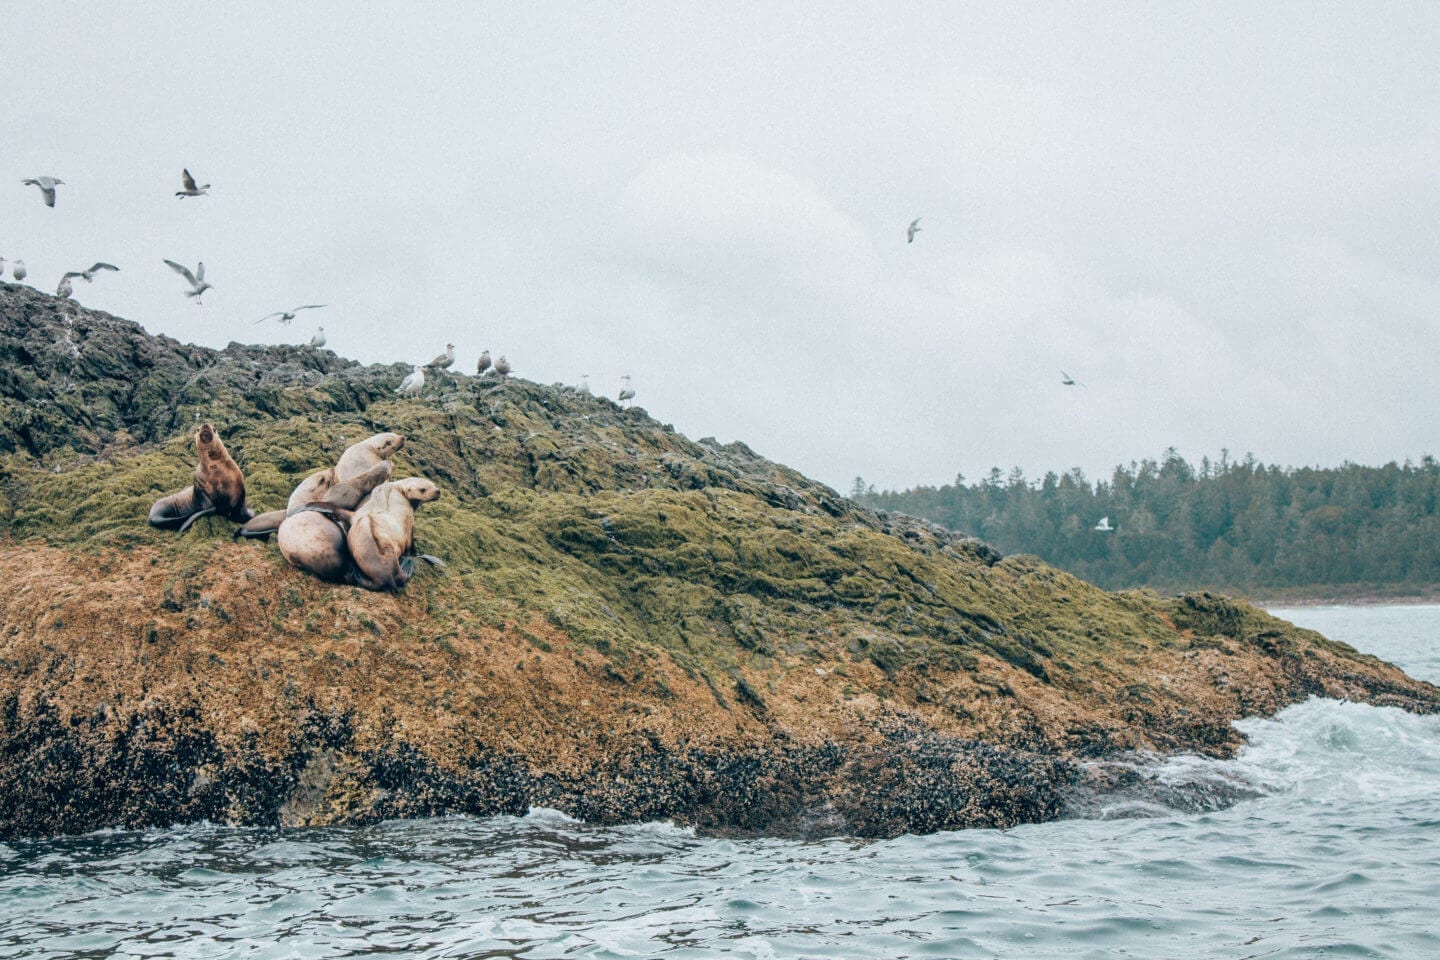 Seals sitting on the rocks in Tofino, BC